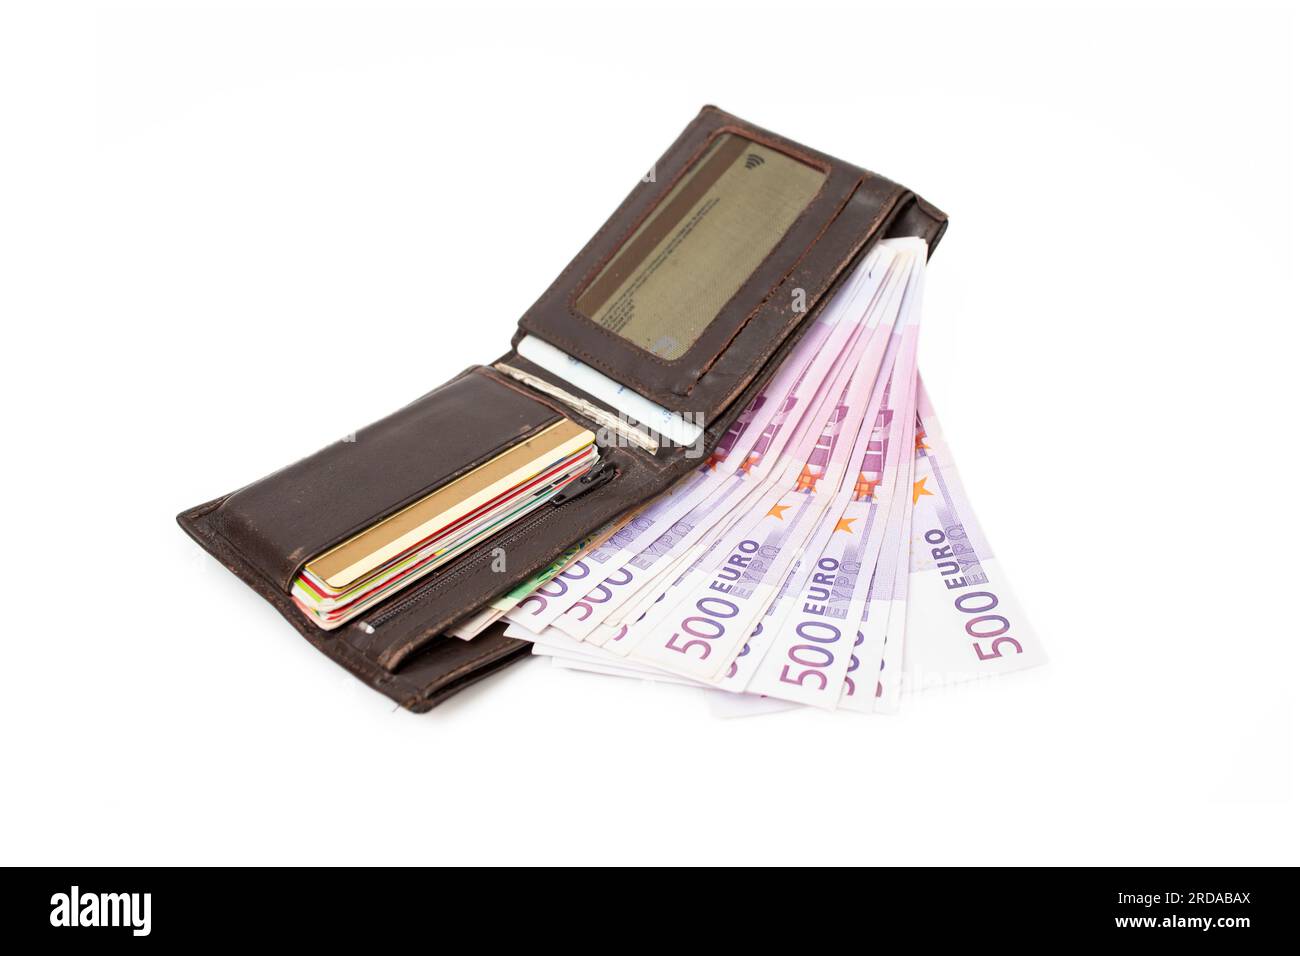 500 euro paper banknotes in a opened brown leather wallet, isolated on white background. Stock Photo